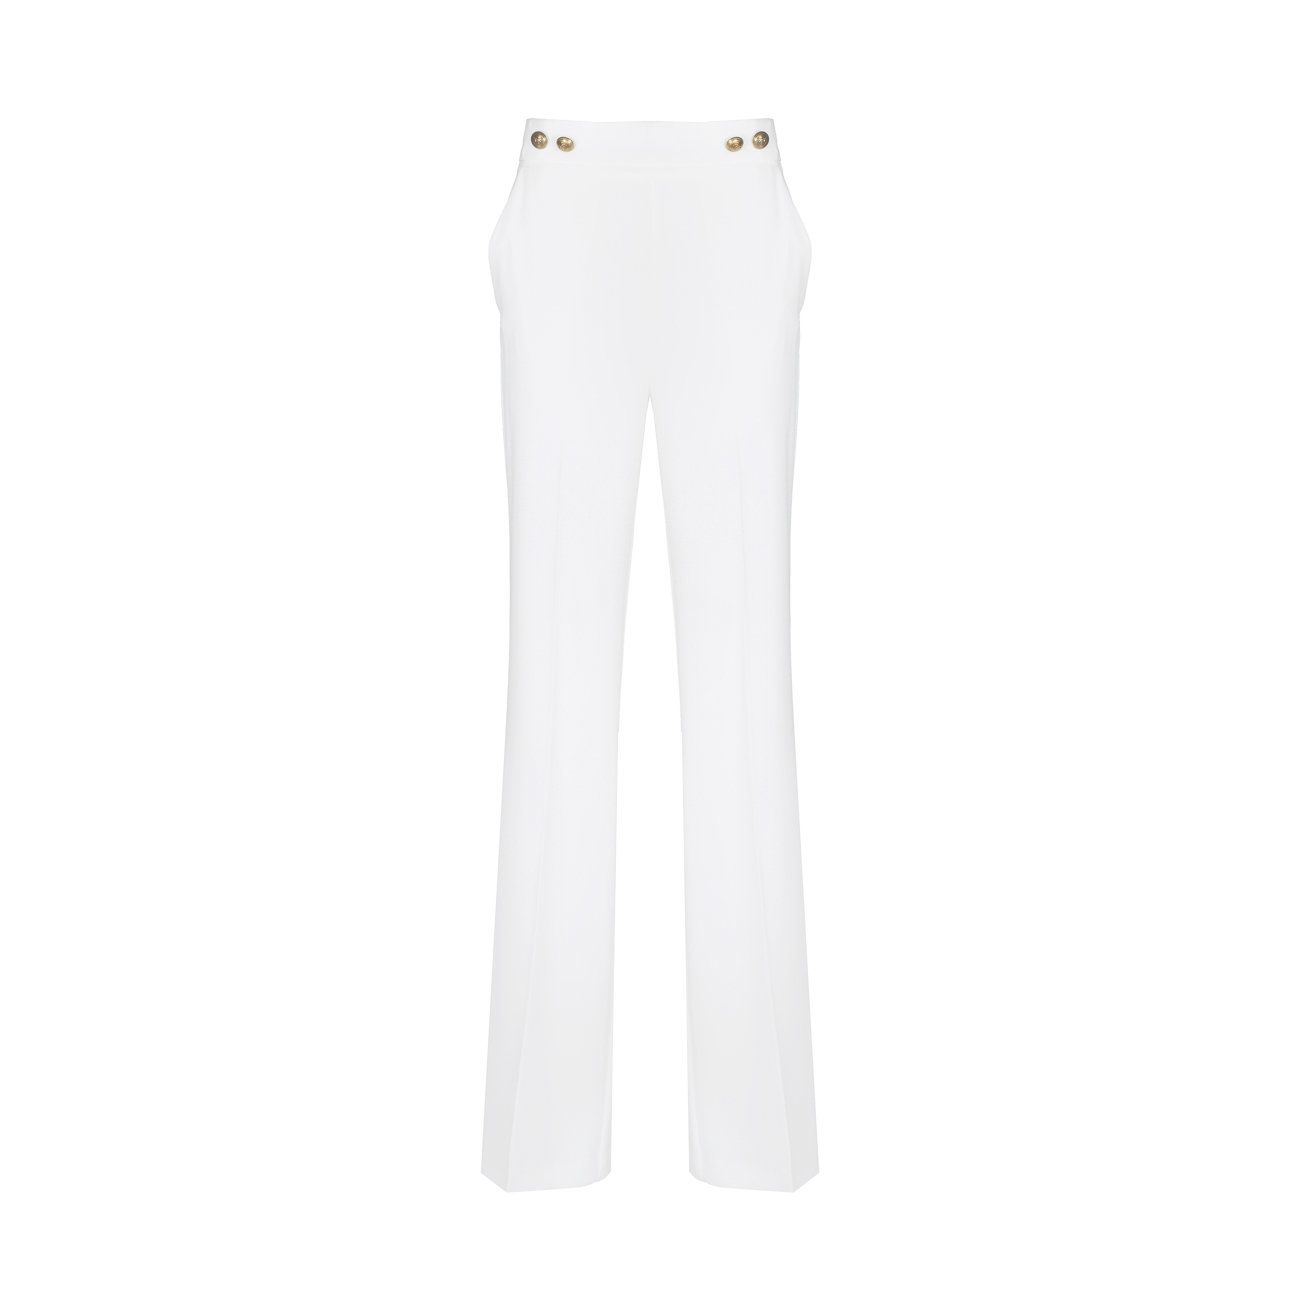 Pinko Cotton Button Detailed Flared Trousers in White Womens Trousers Save 32% Slacks and Chinos Slacks and Chinos Pinko Trousers 